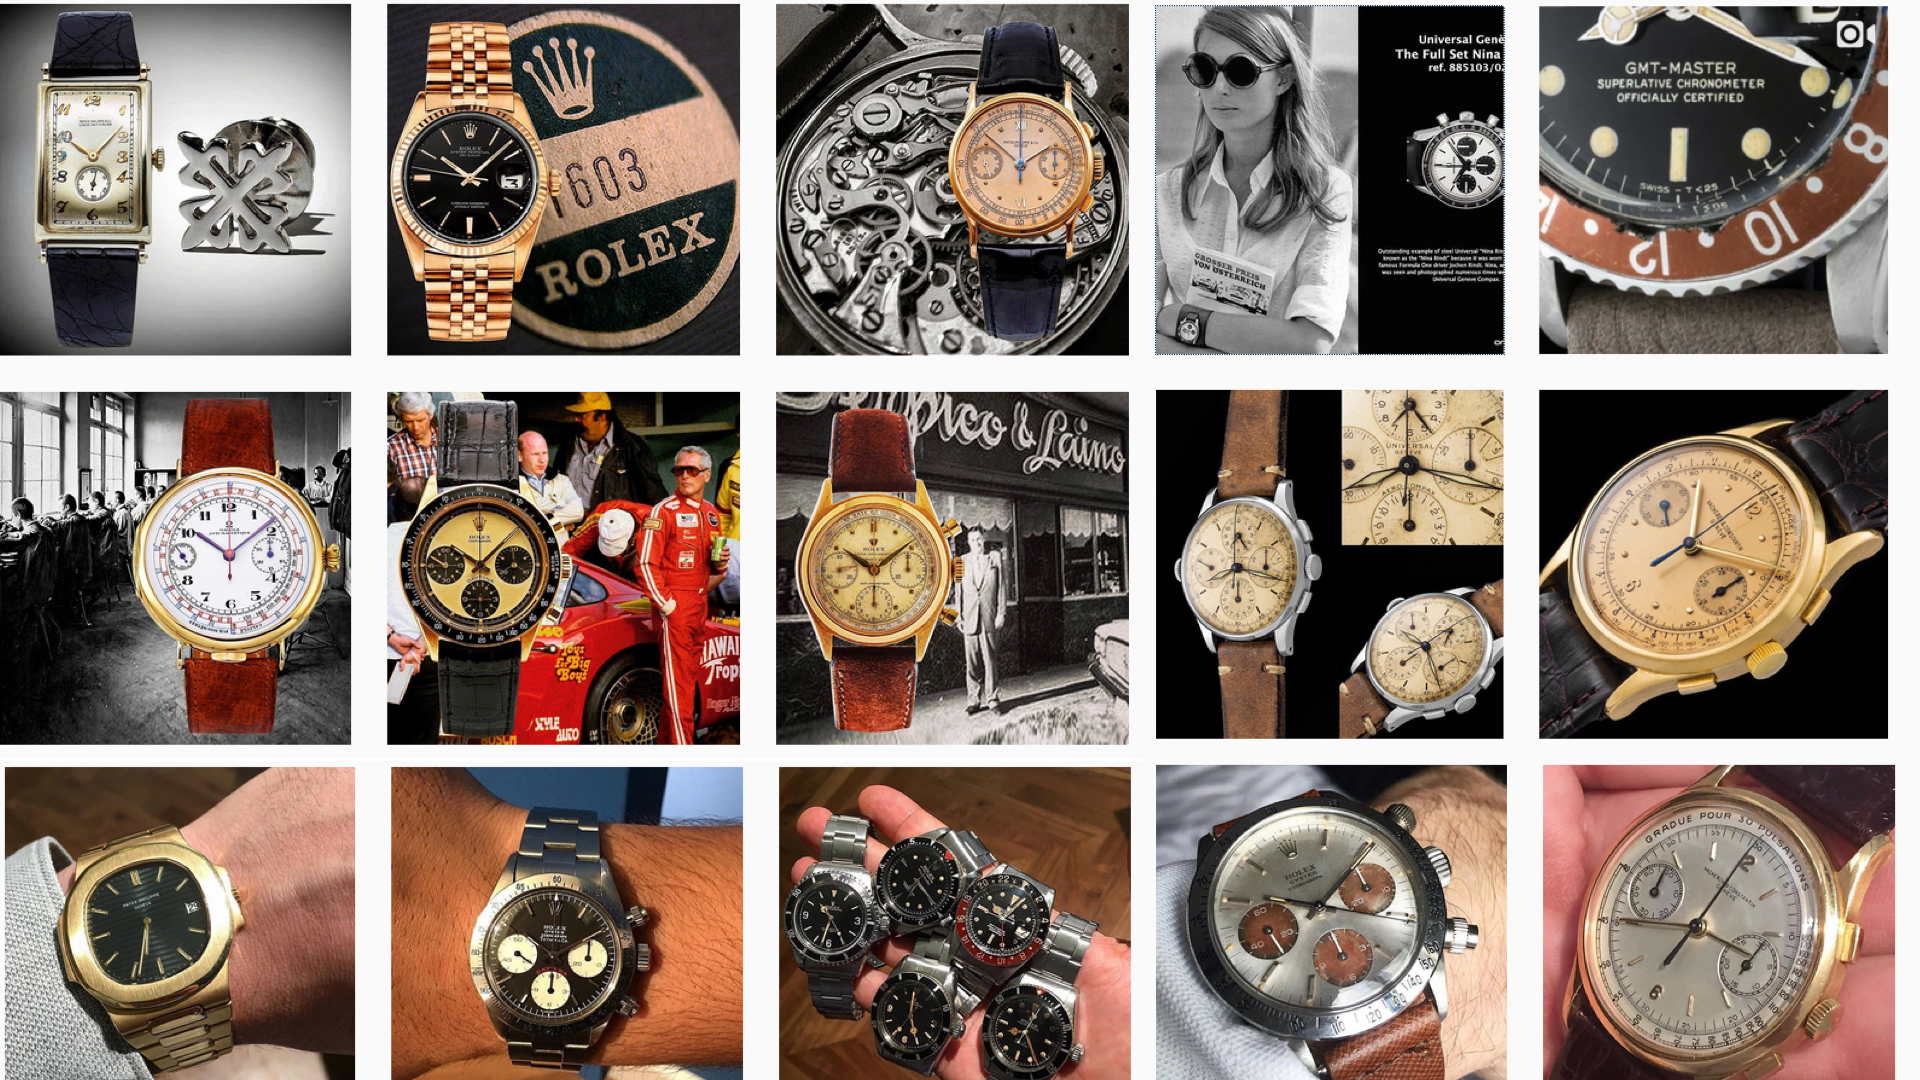 Grey Market Watch Dealers: Safety, Risks, & Considerations